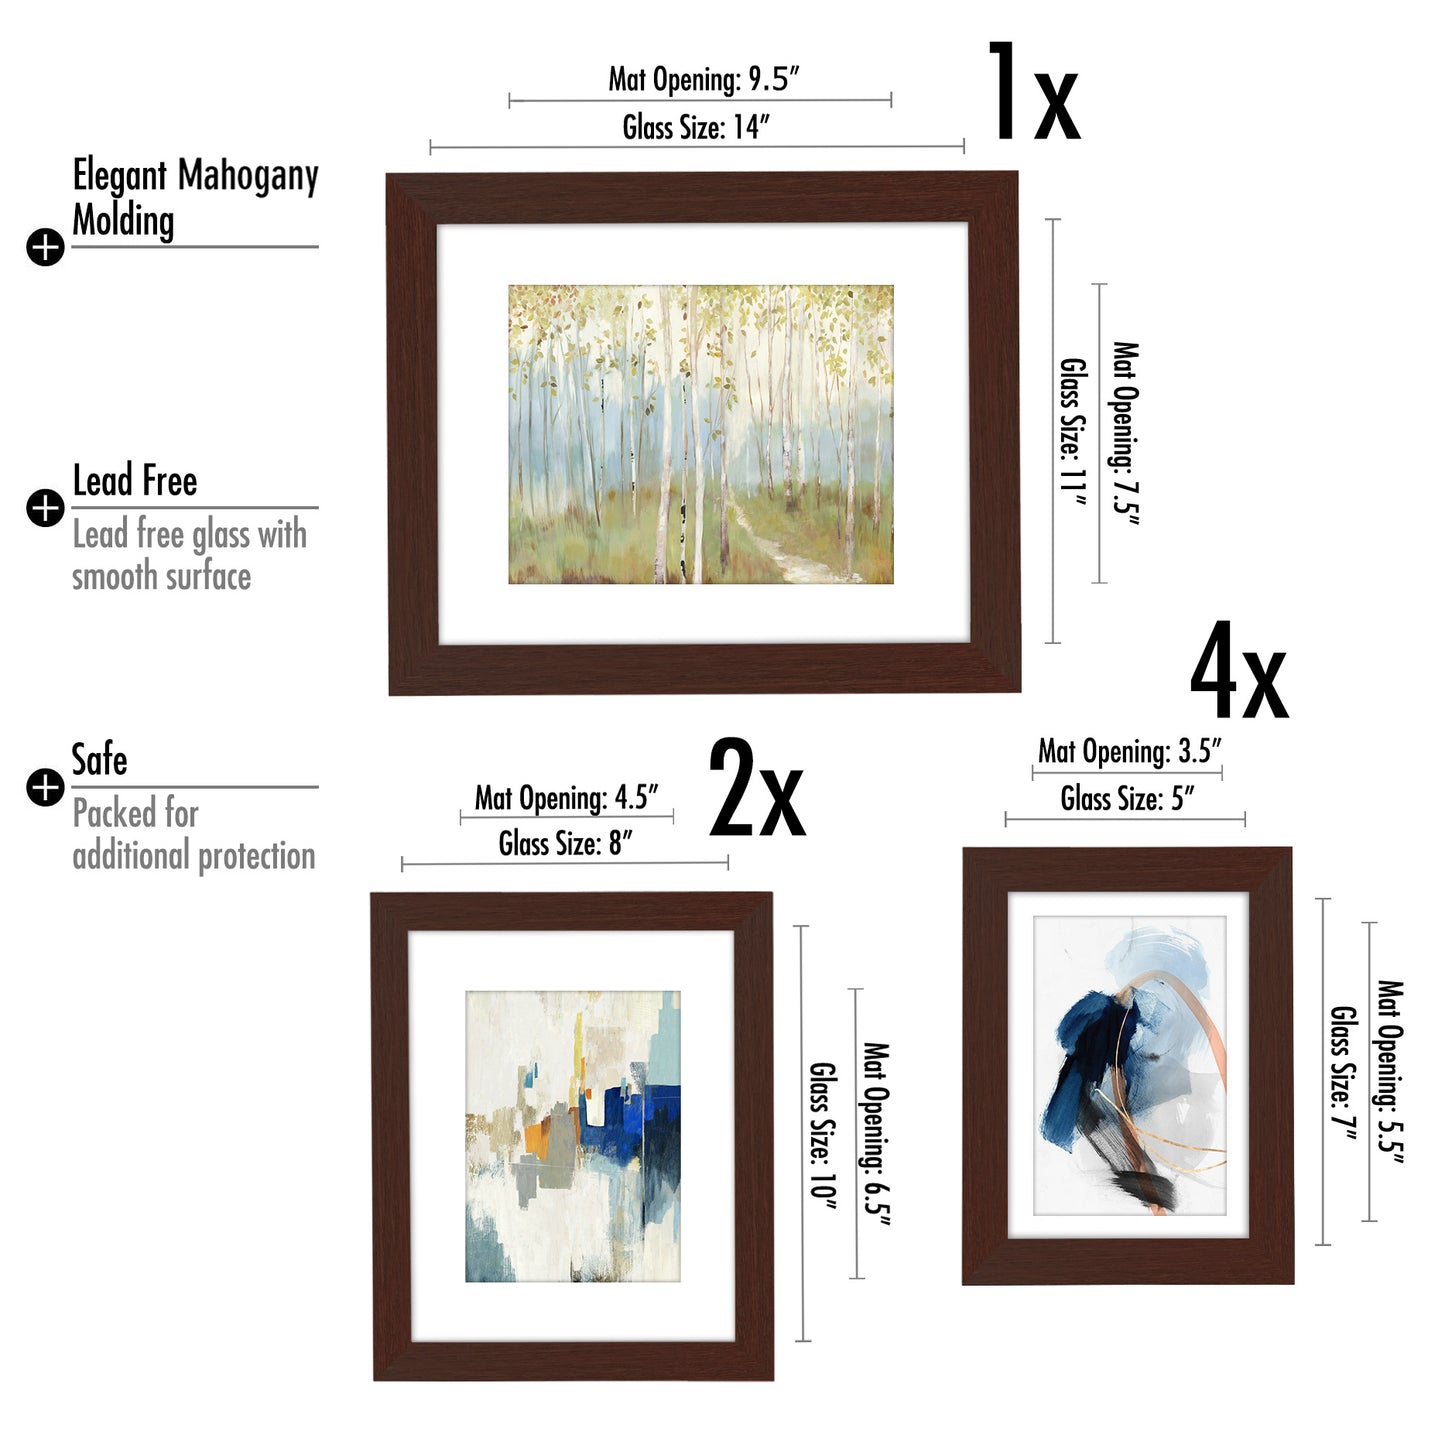 Abstract Views by PI Creative - 7 Piece Framed Gallery Wall Art Set - Americanflat